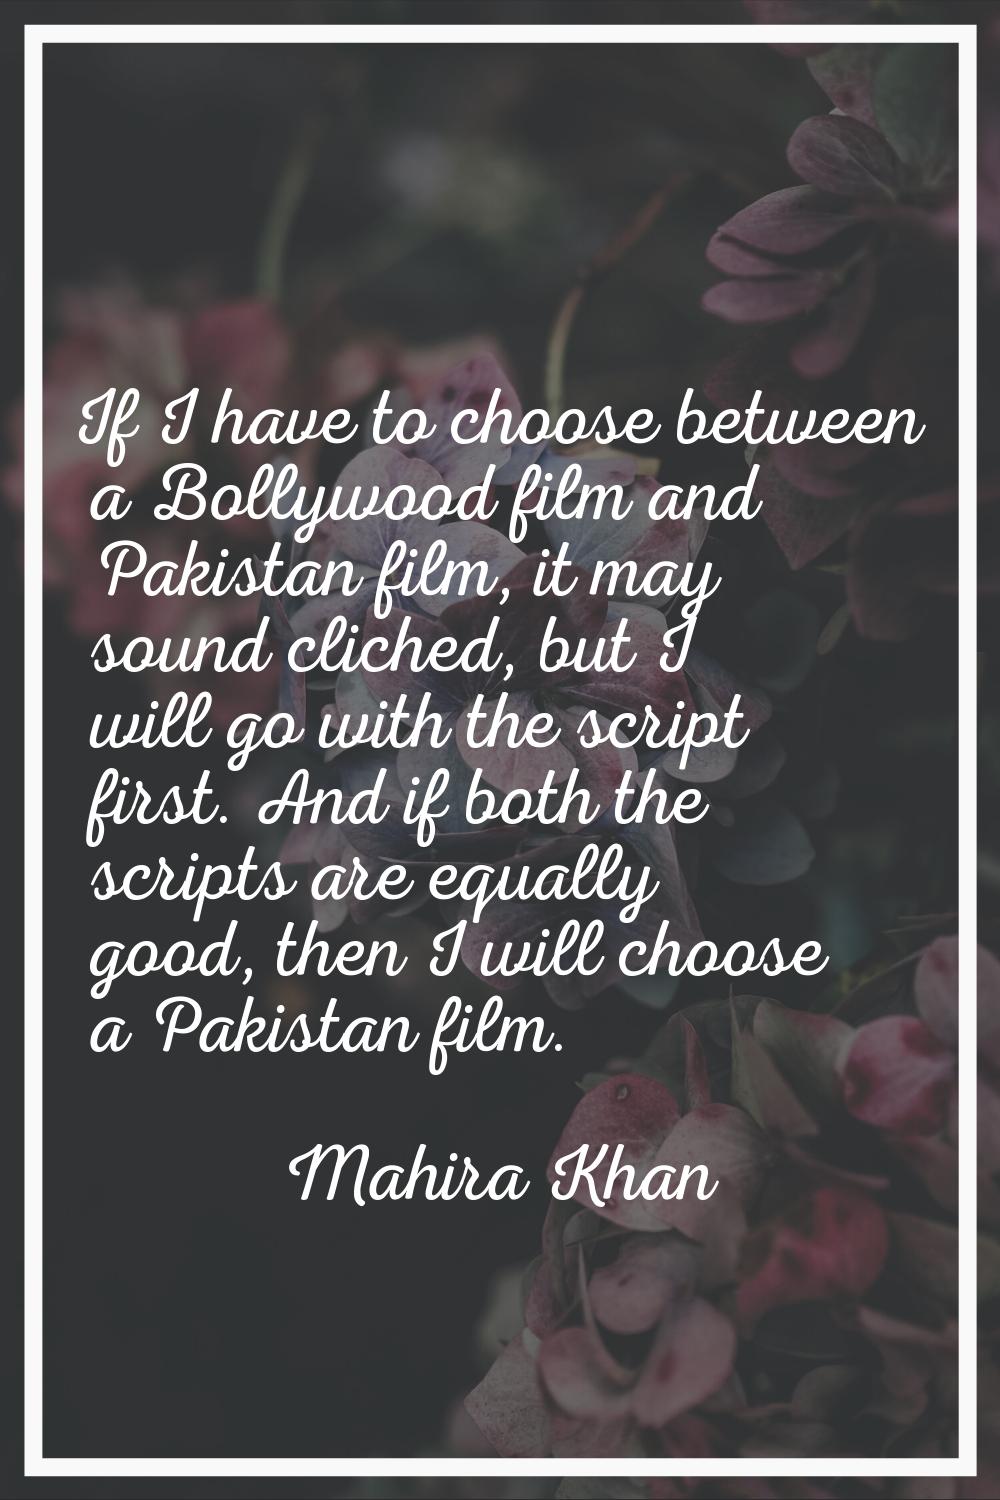 If I have to choose between a Bollywood film and Pakistan film, it may sound cliched, but I will go